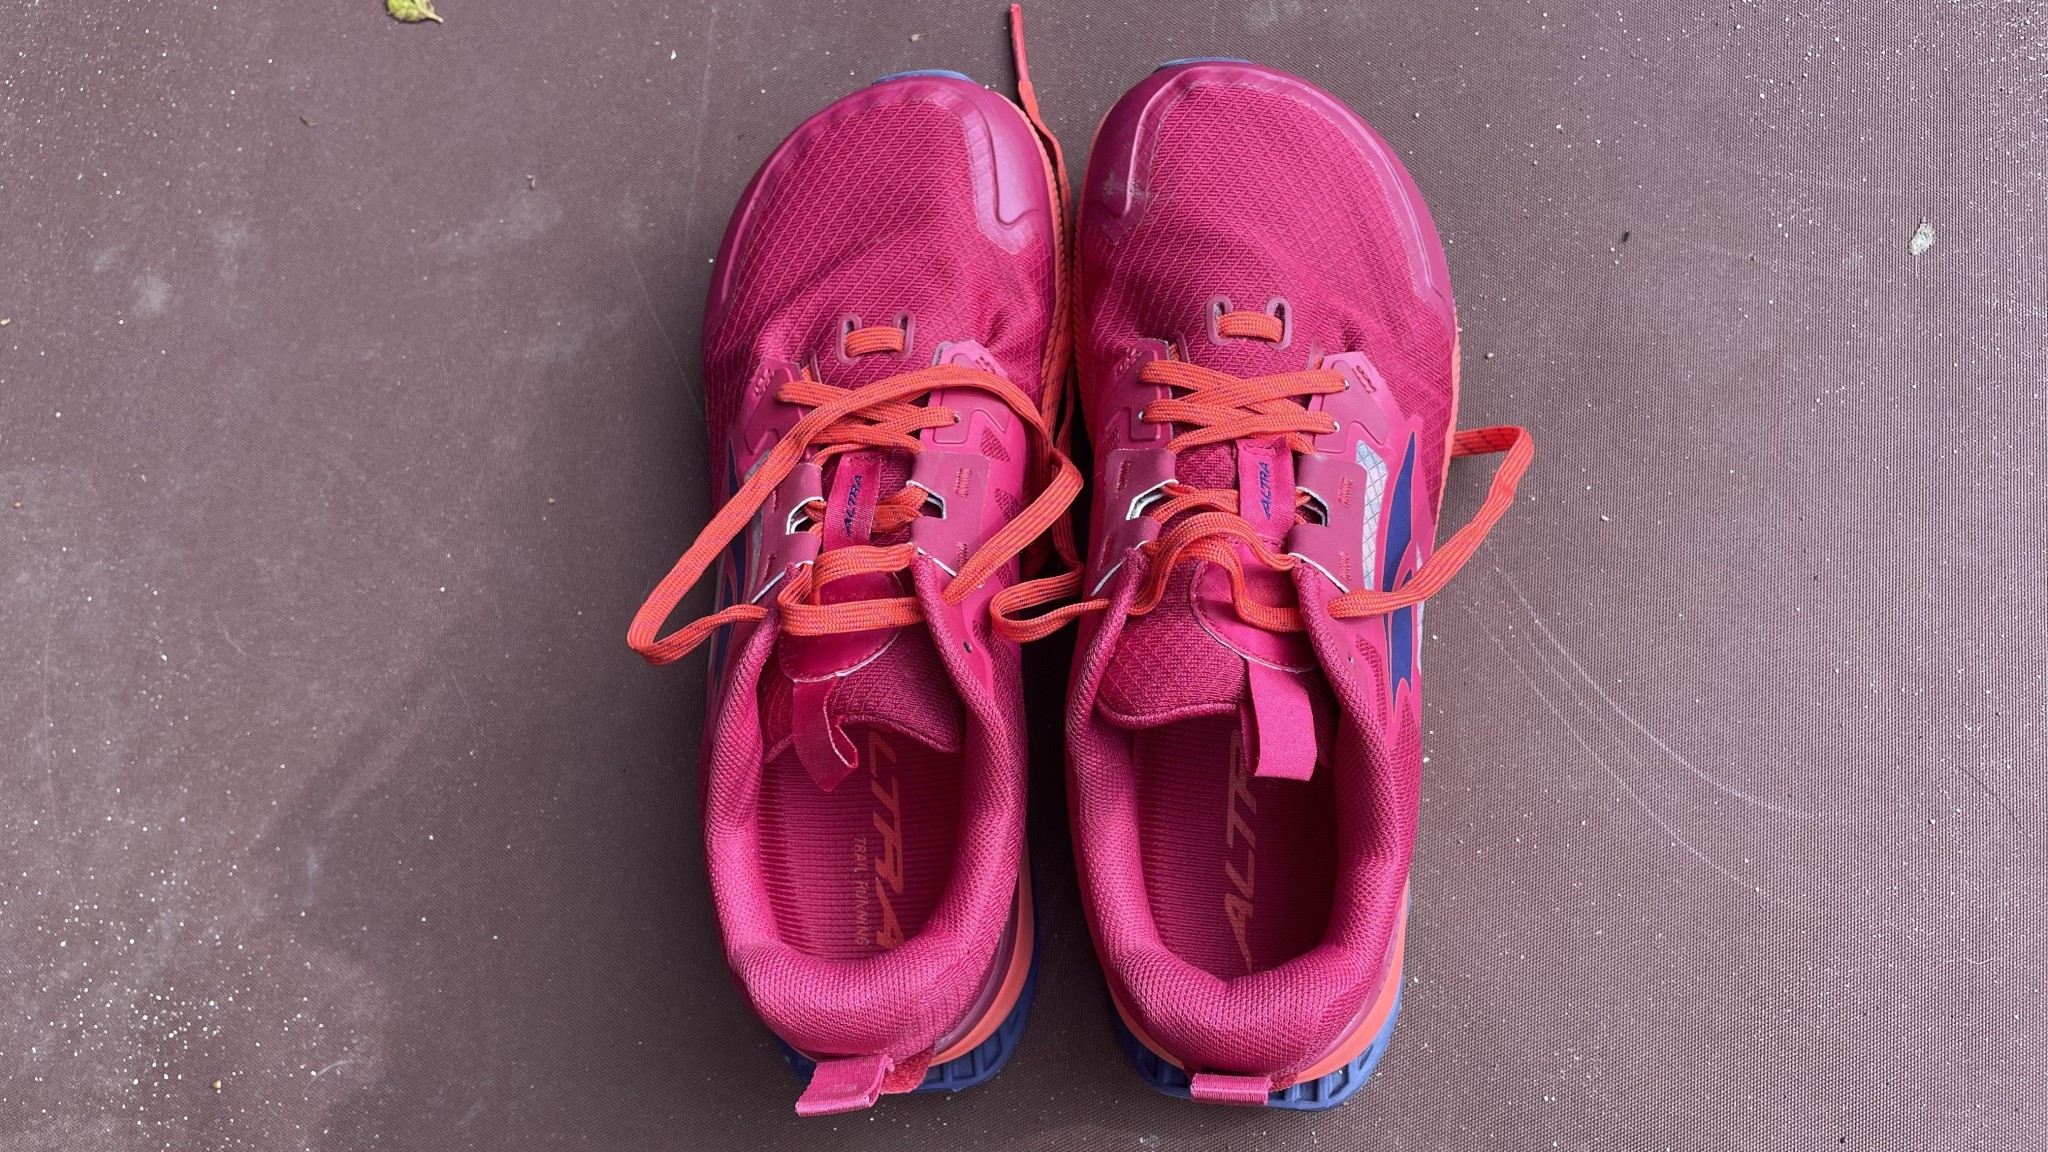 Altra Lone Peak 7 - Women's Review | Tested by GearLab